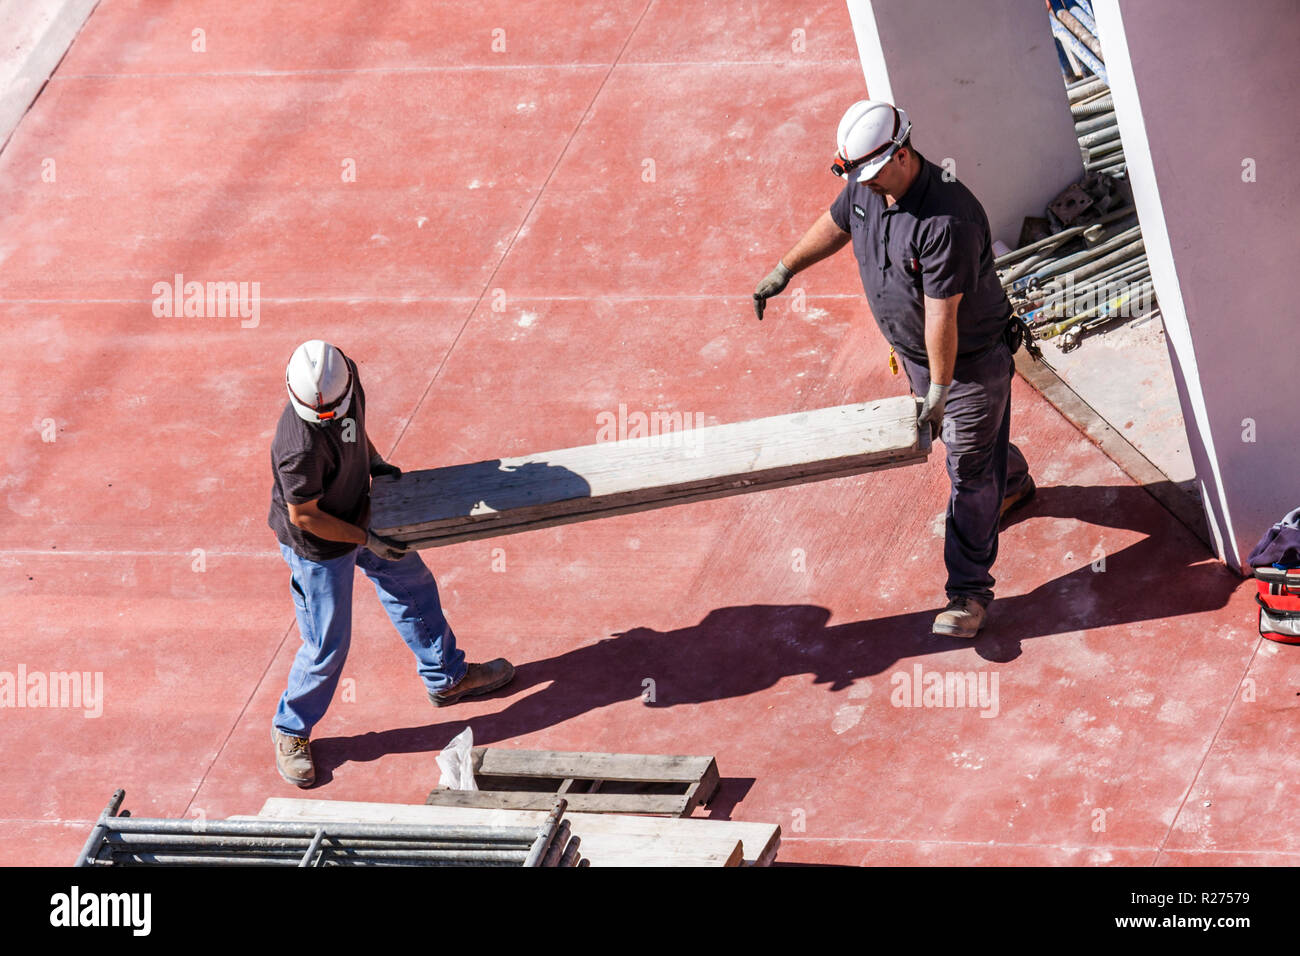 Miami Beach Florida,hotel hotels lodging inn motel motels,hotels,under new construction site building builder,workers,building site,man men male adult Stock Photo